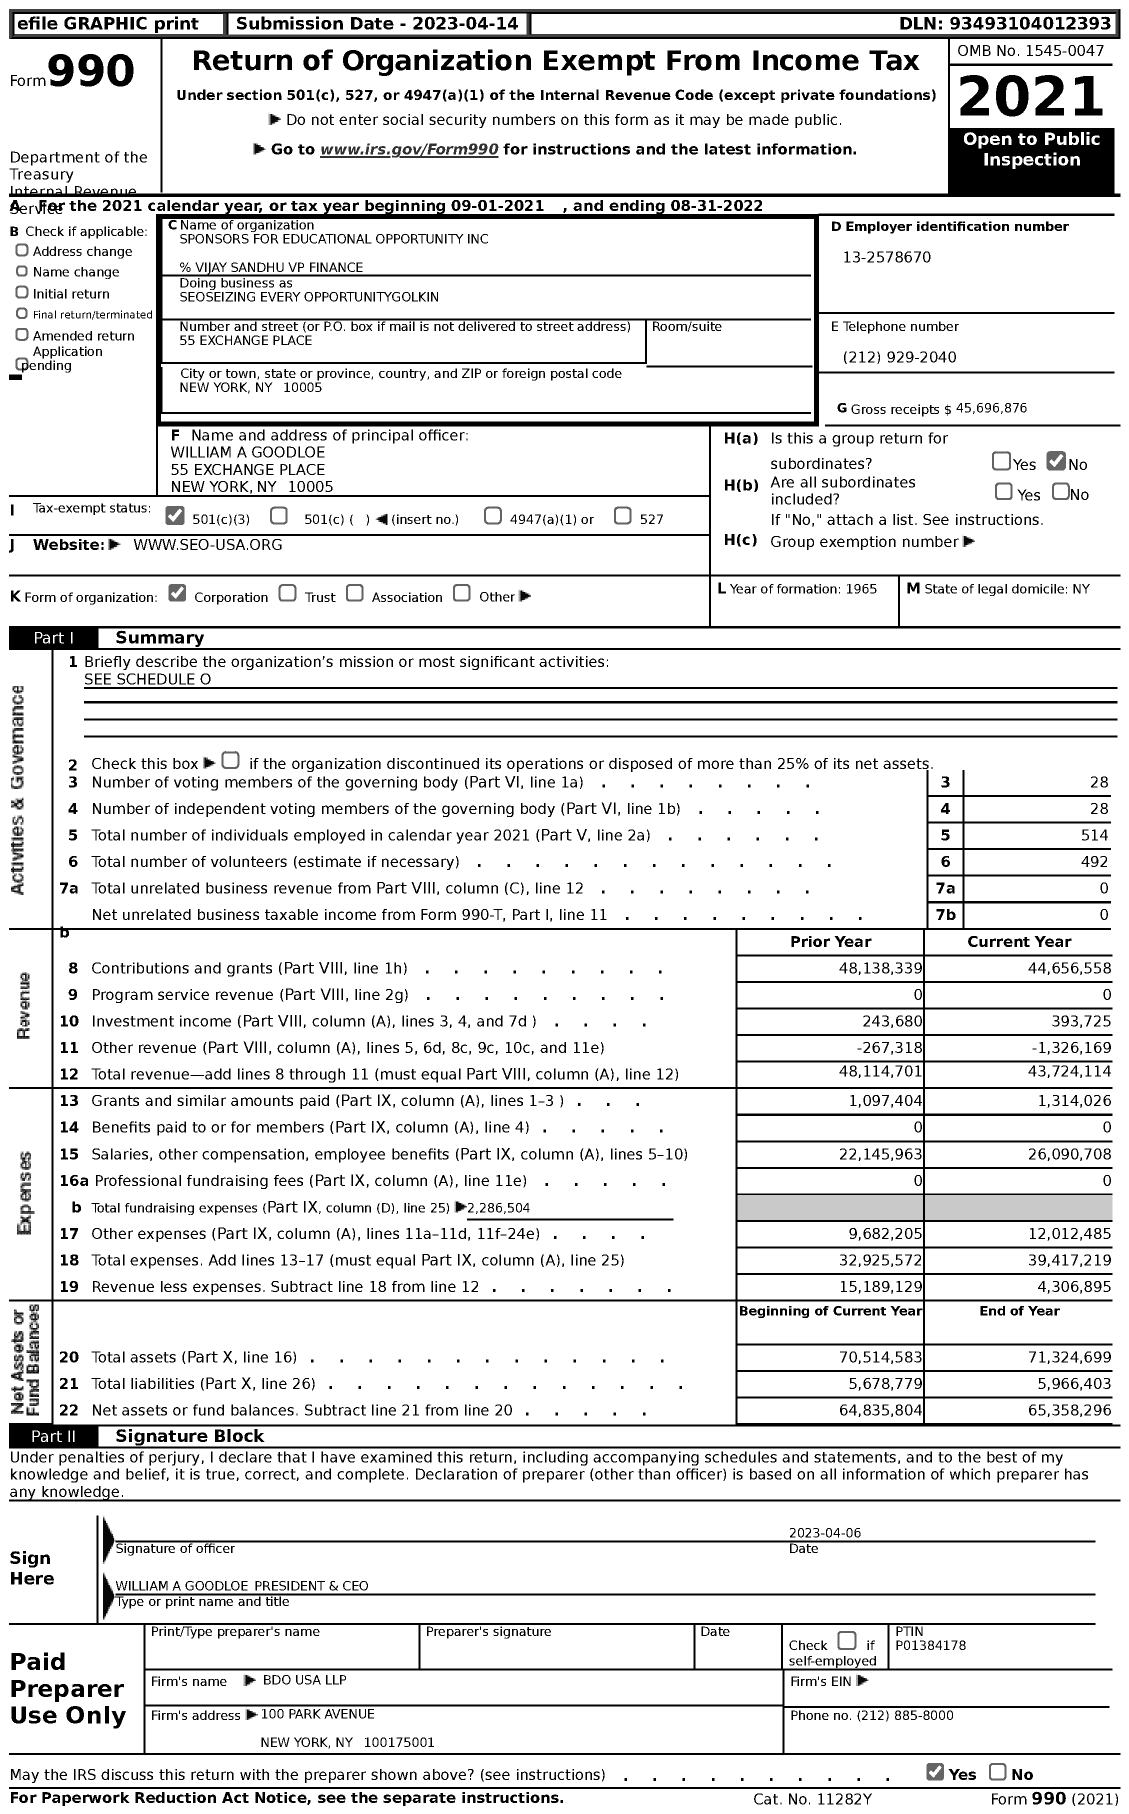 Image of first page of 2021 Form 990 for Seoseizing Every Opportunitygolkin (SEO)